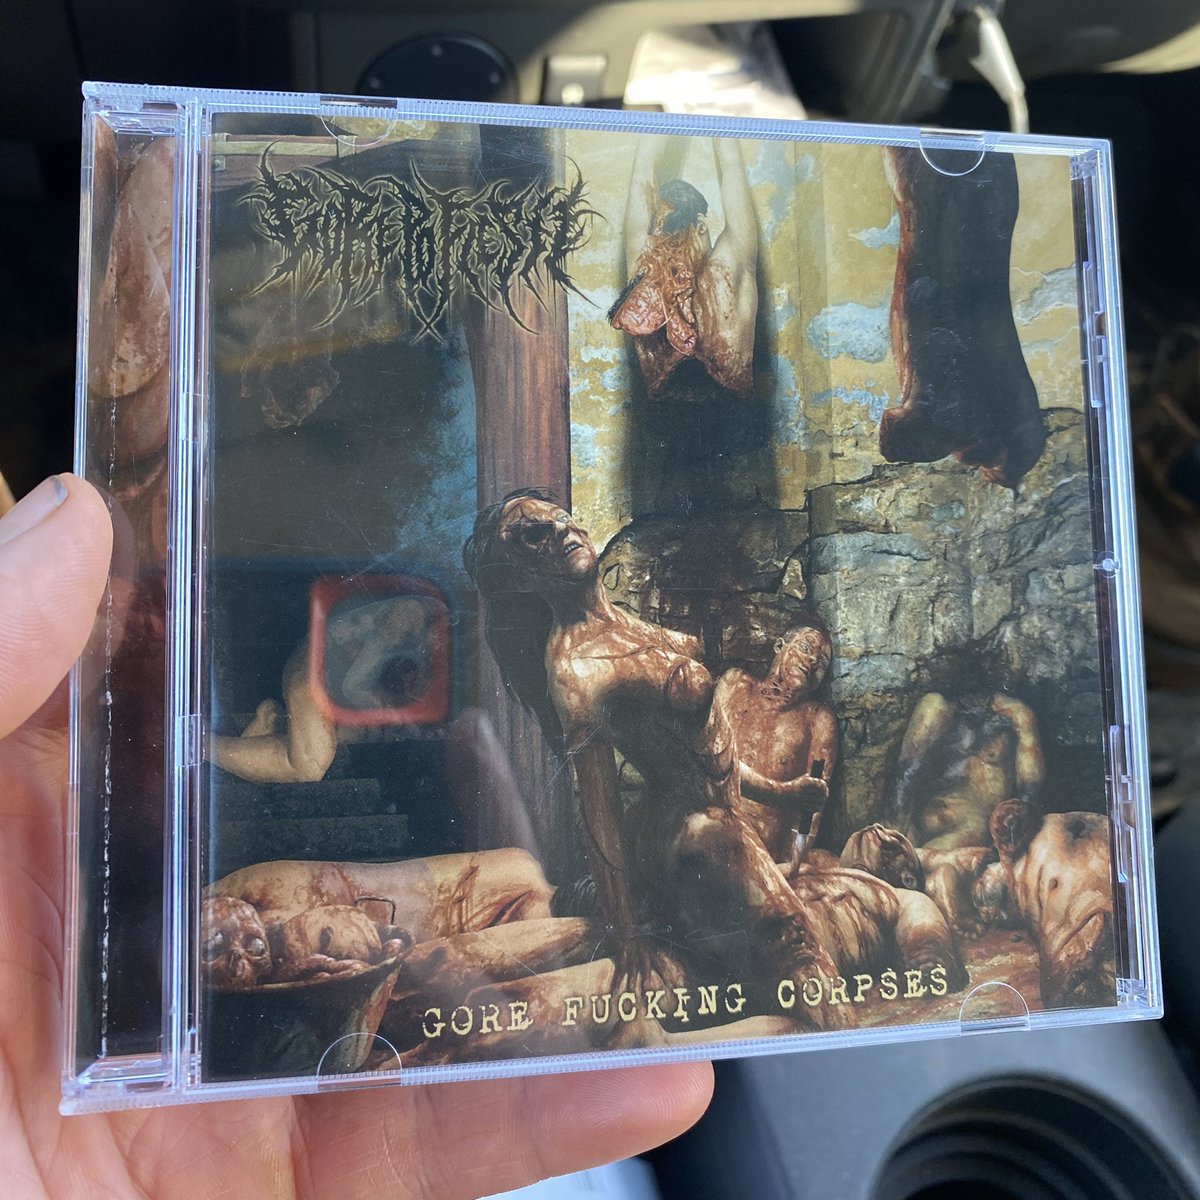 Countdown to the weekend with some high-calibre Nicaraguan gore courtesy of NEW STANDARD ELITE Gorepoflesh - Gore Fucking Corpses (2009) 🇳🇮 newstandardelite.bandcamp.com/album/gorepofl…